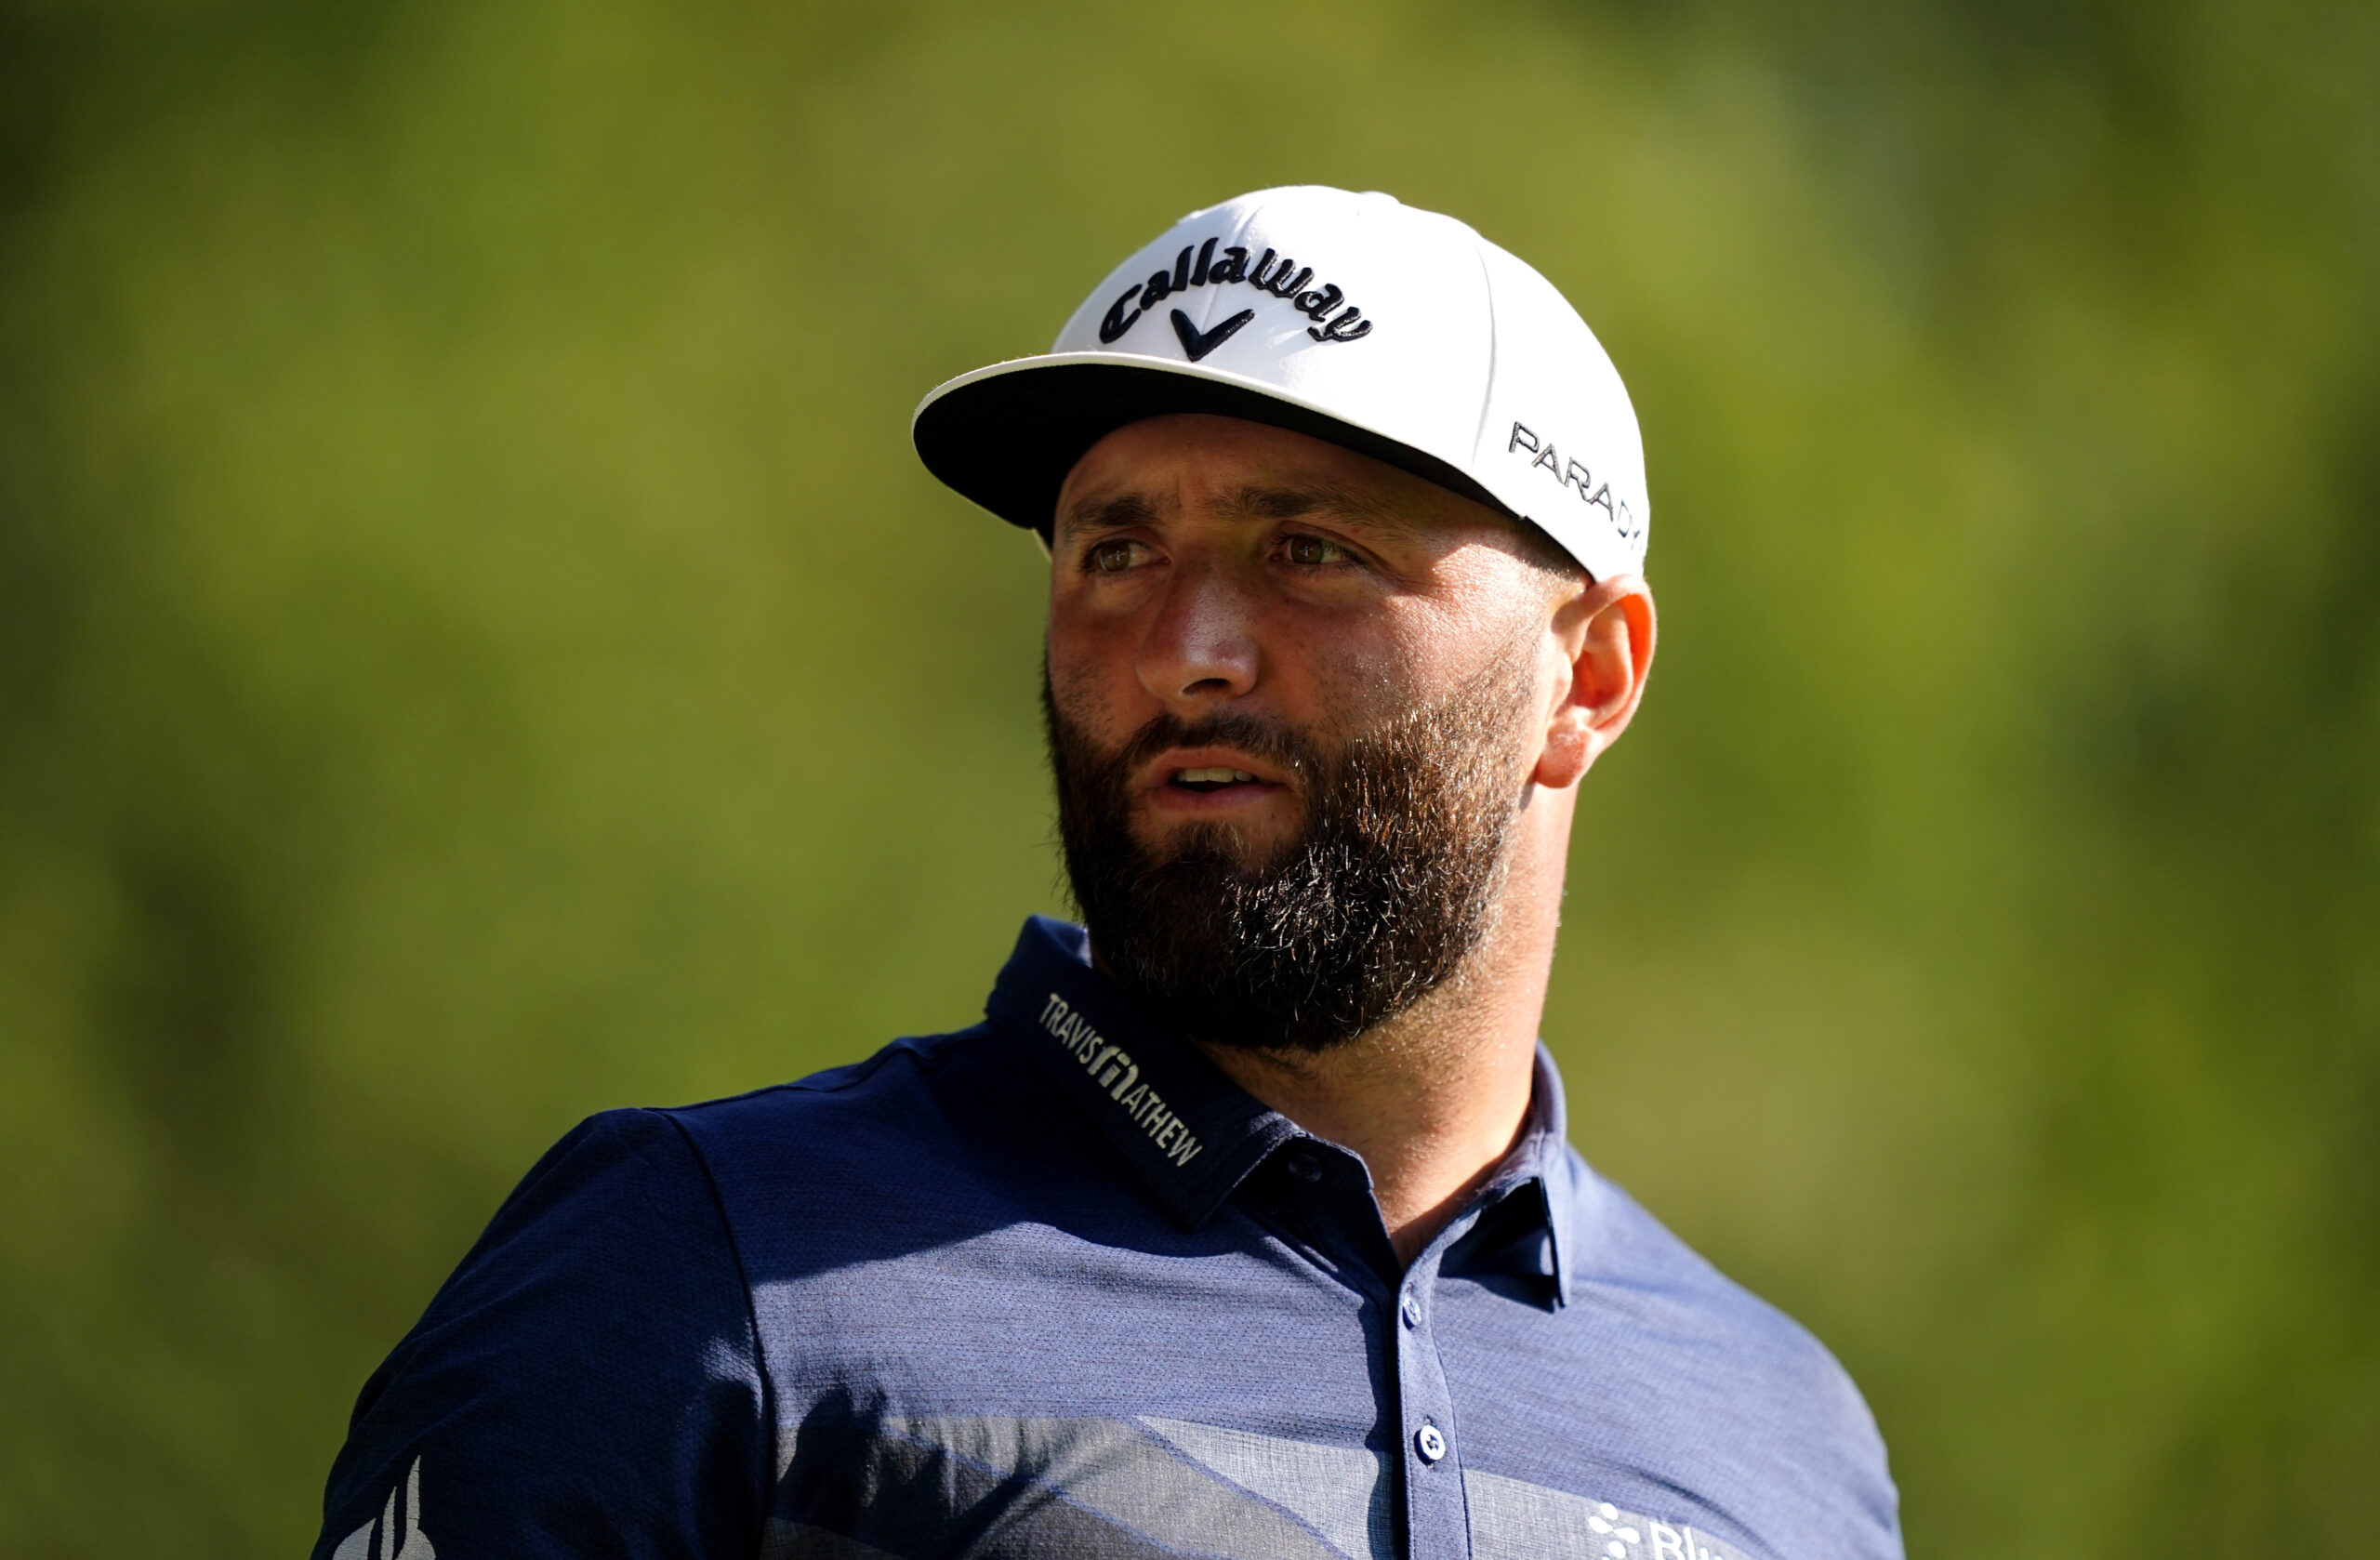 Jon Rahm is gearing up to defend his Masters title